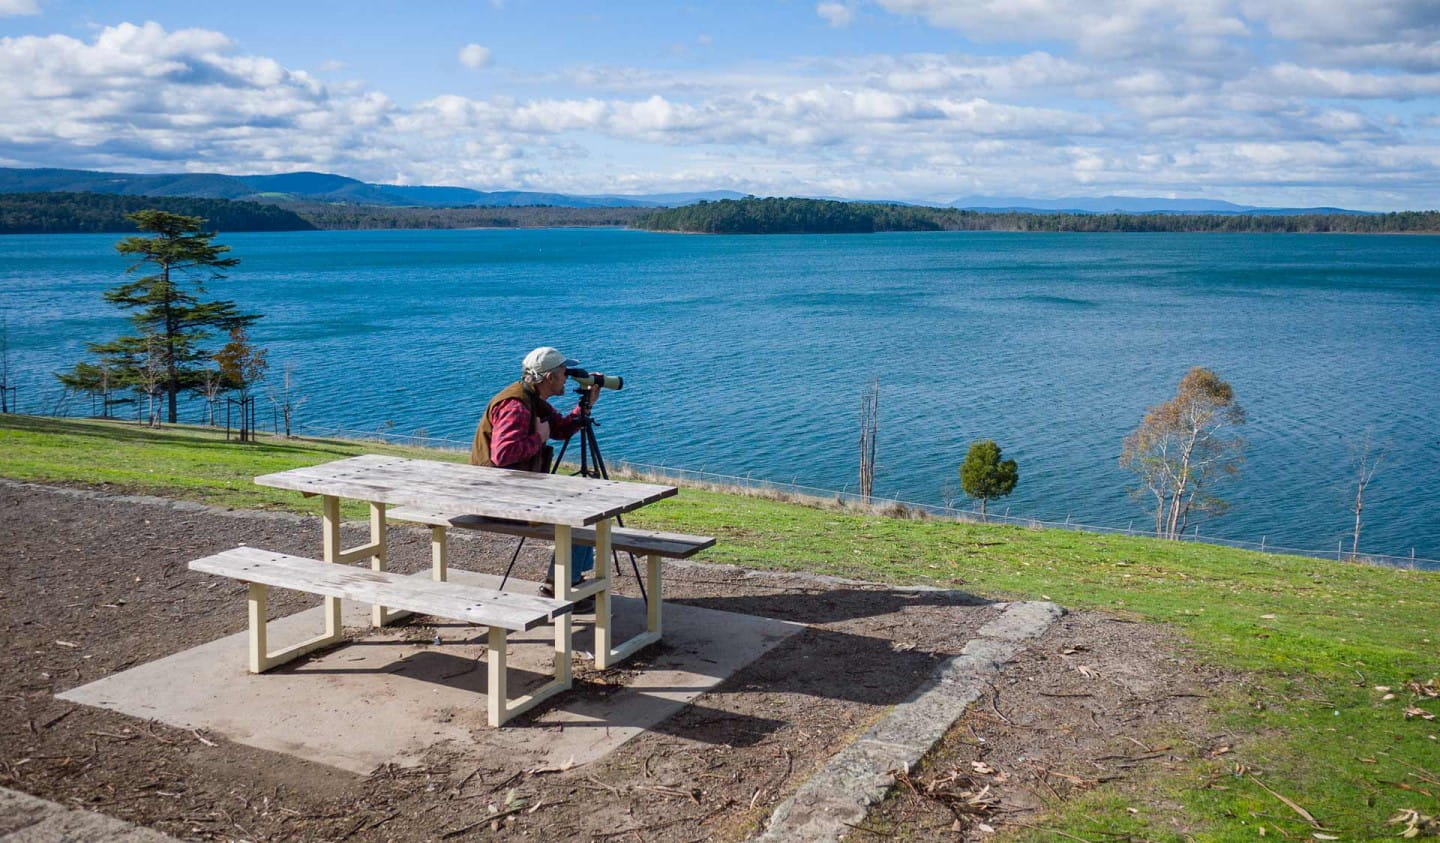 Yan Yean Reservoir is a great spot for a picnic.